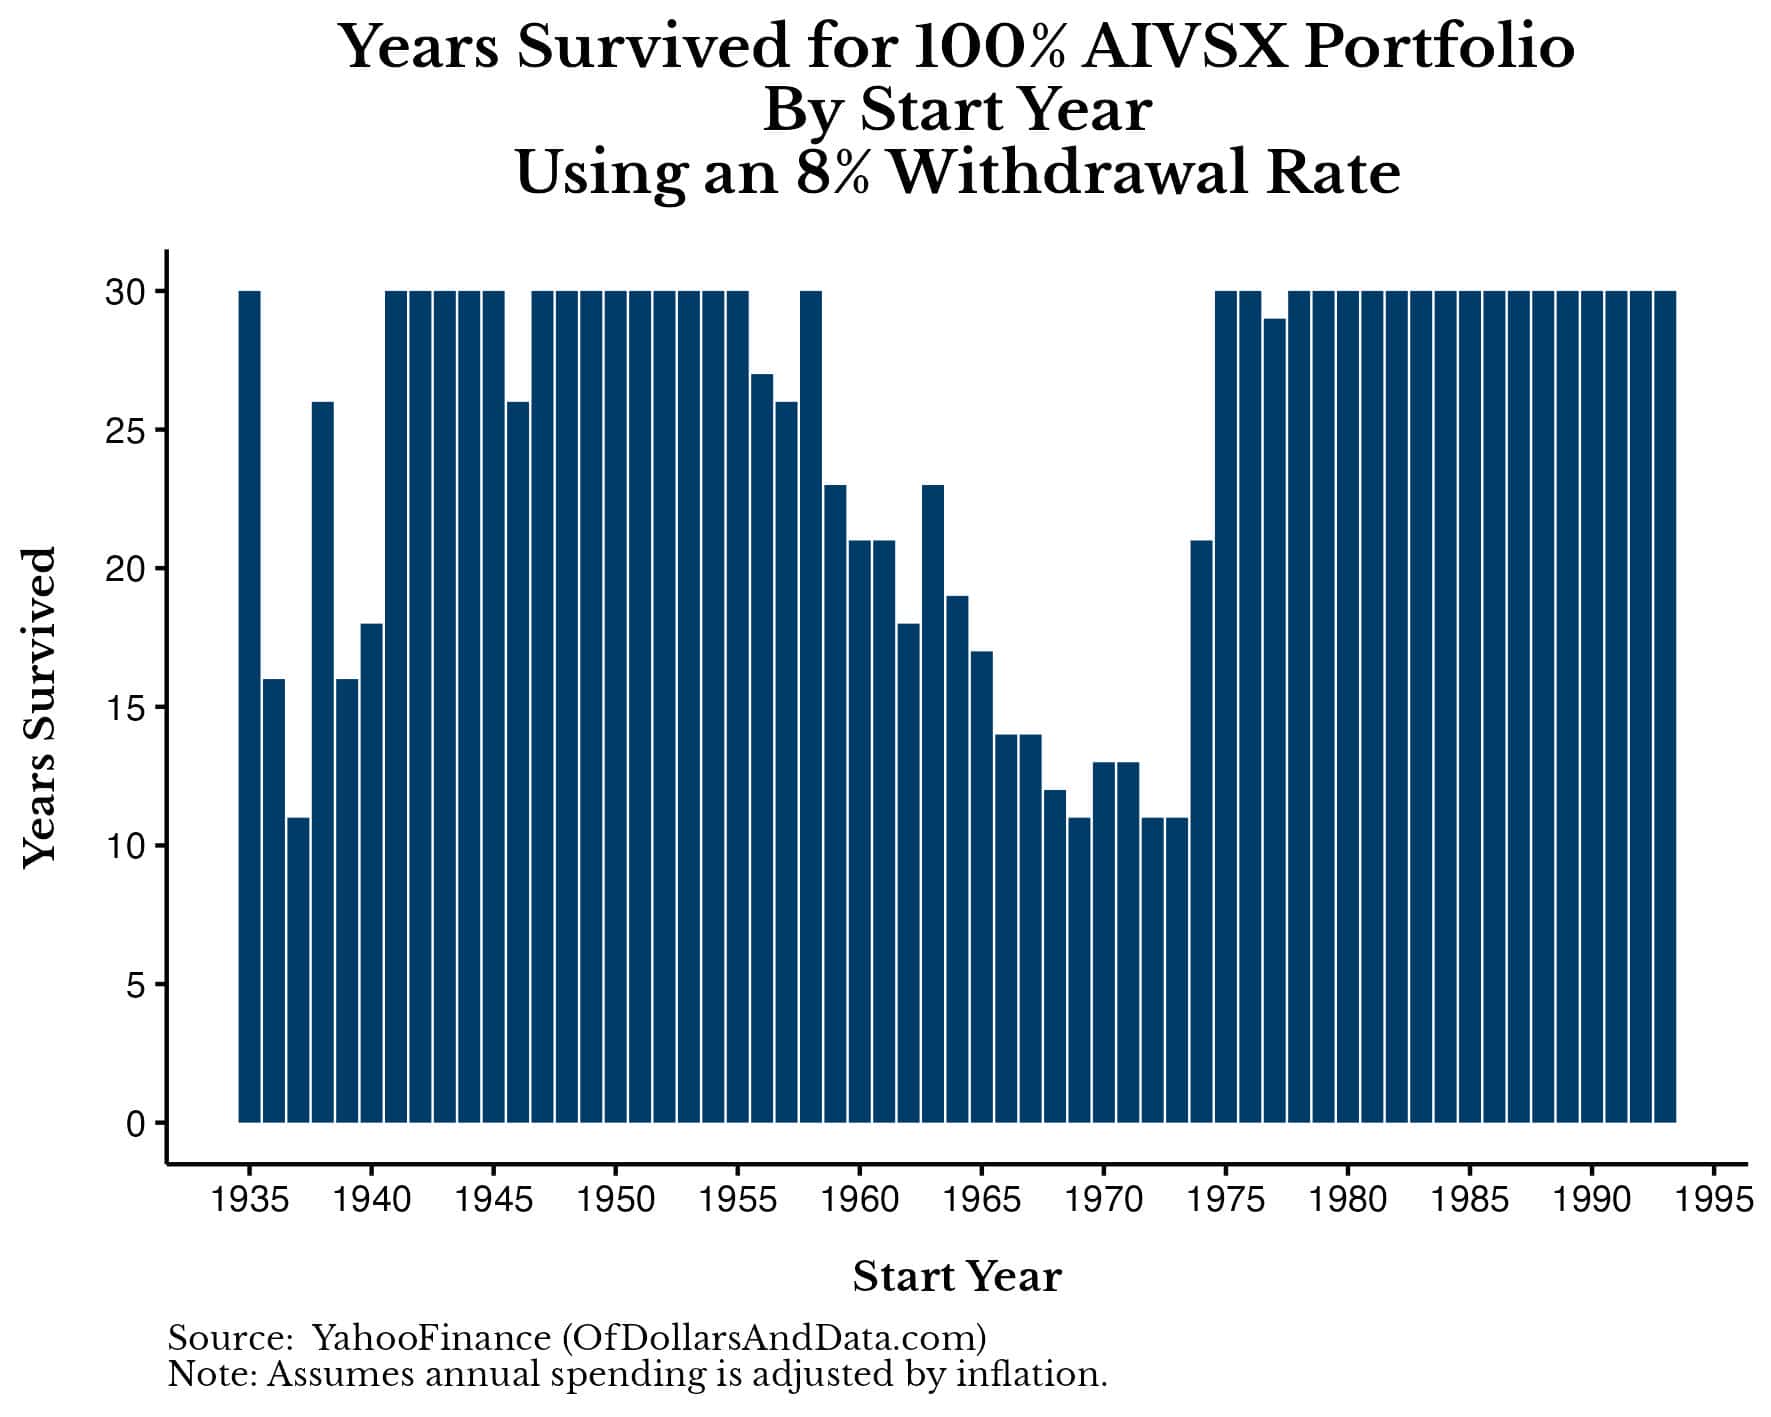 Chart of years survived for 100% AIVSX portfolio over a 30-year time horizon using an 8% withdrawal rate.